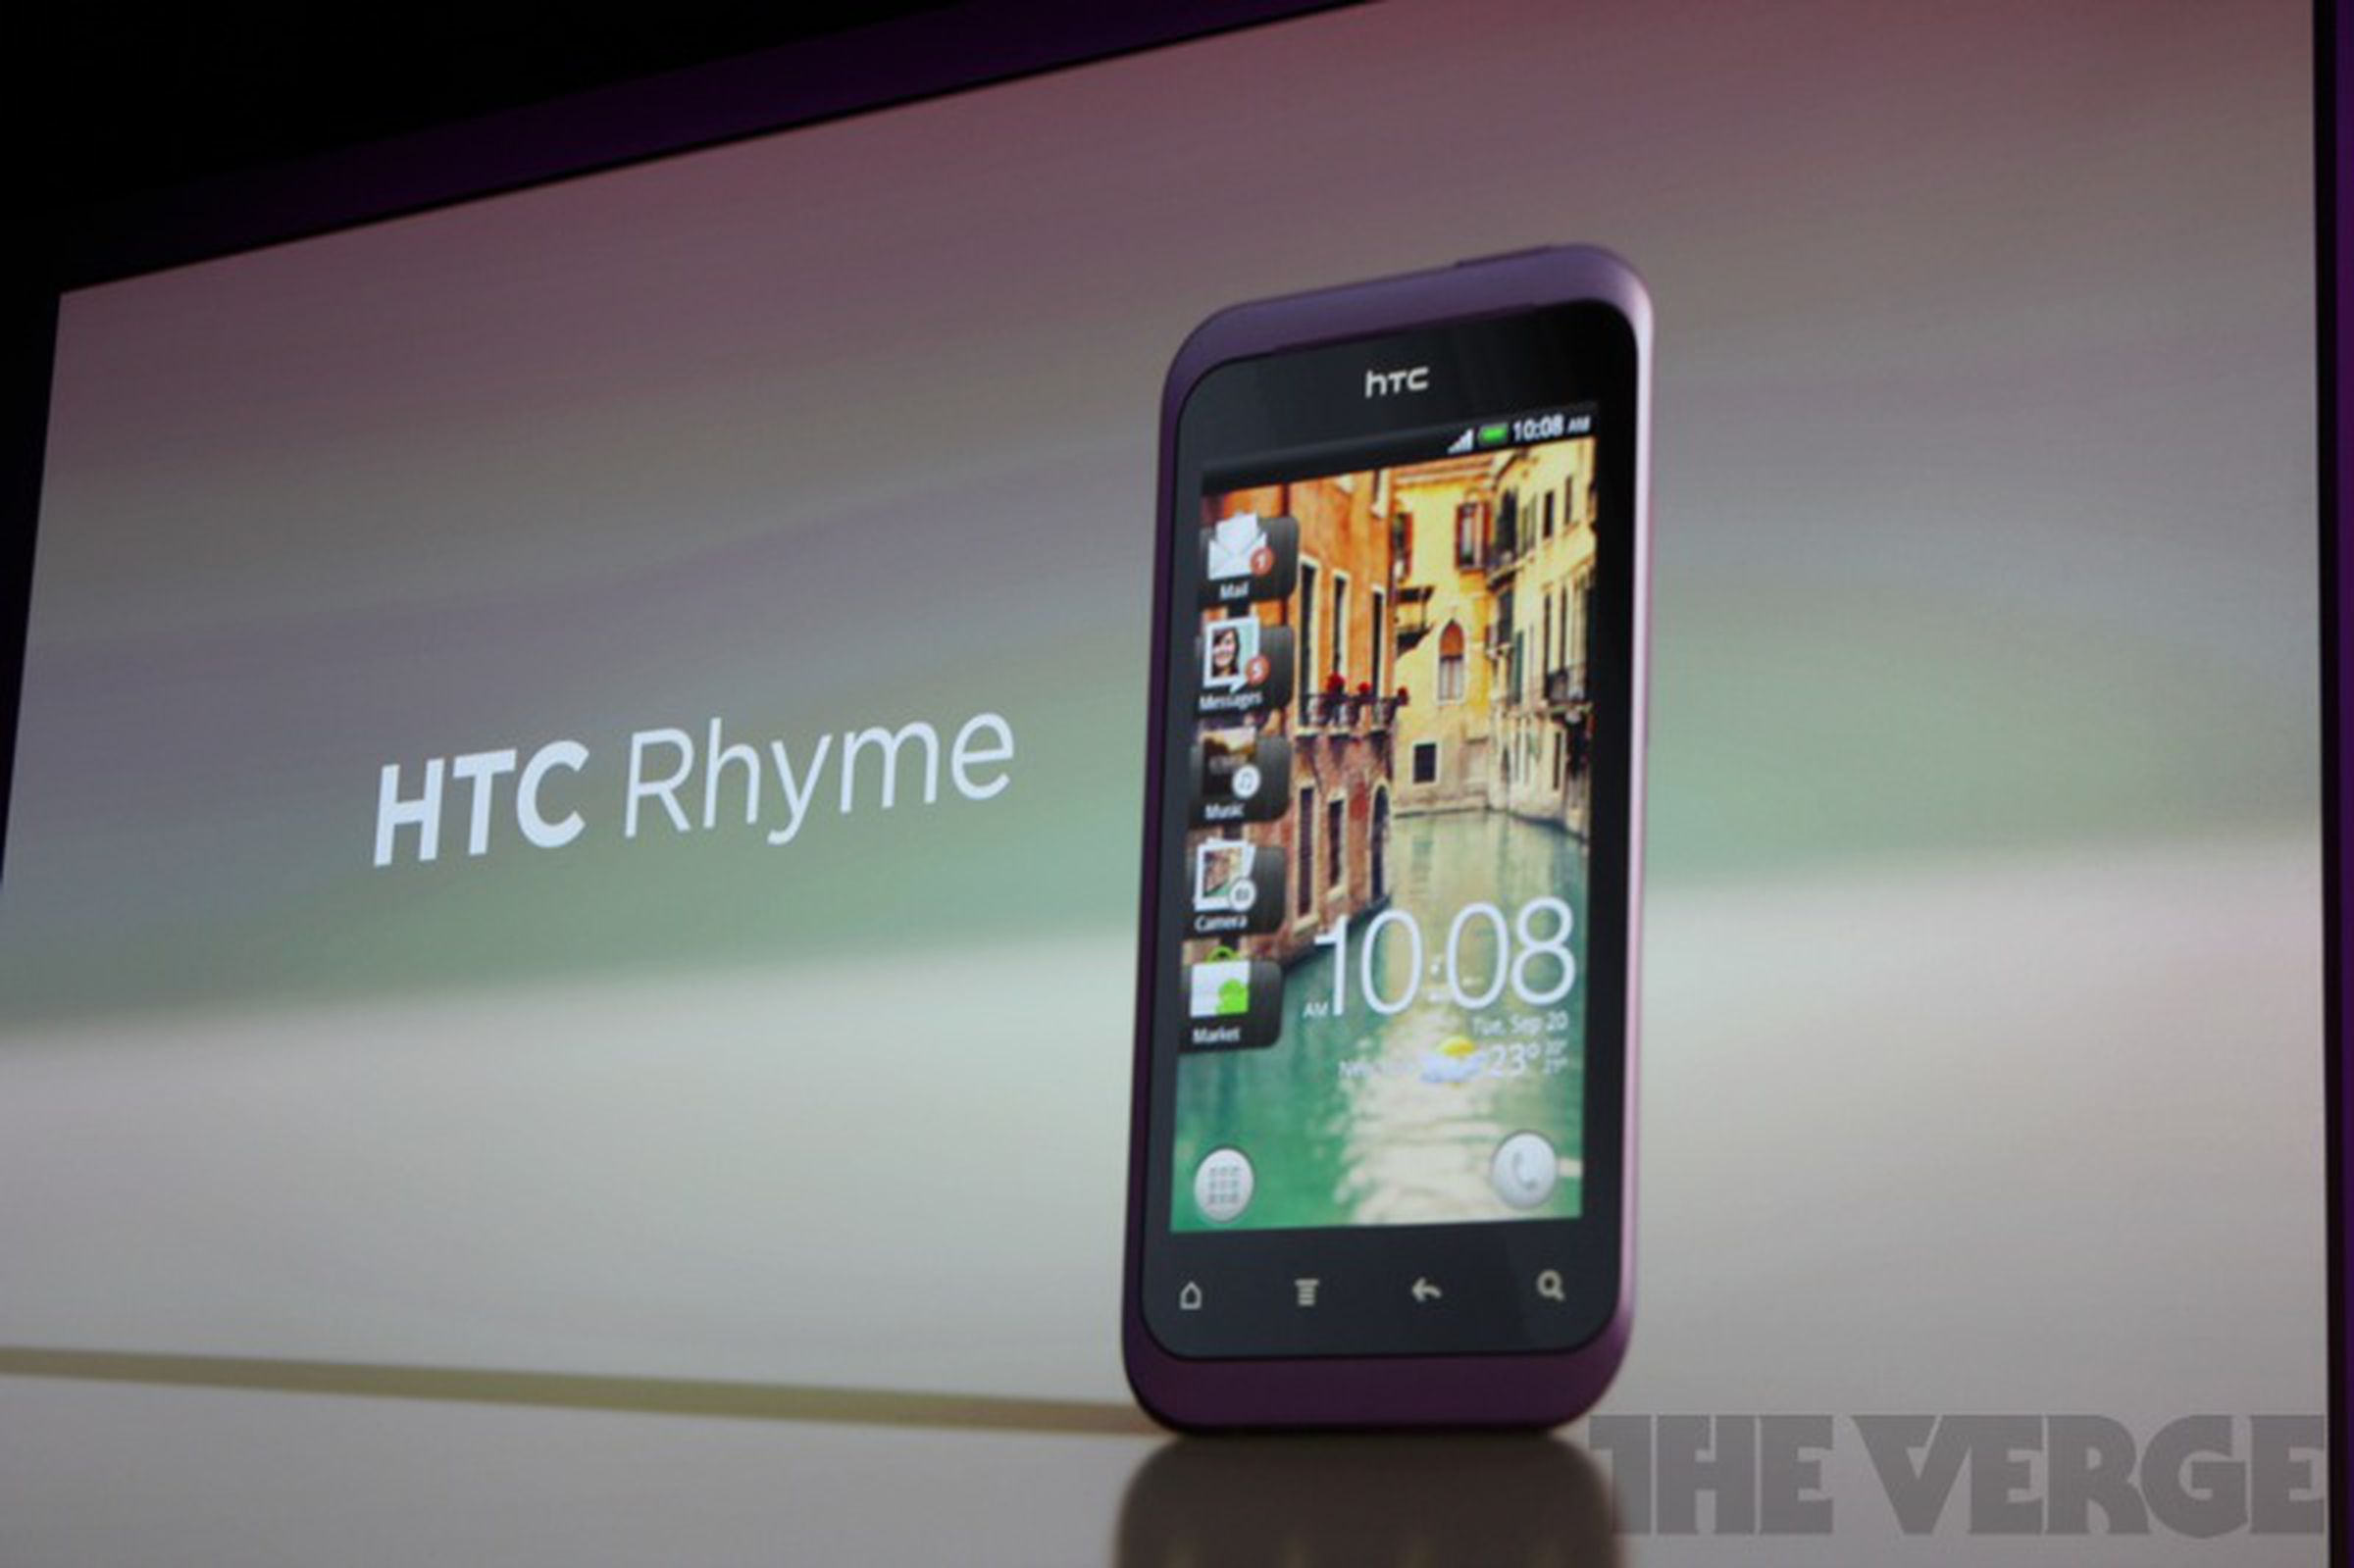 HTC Rhyme event and press shots